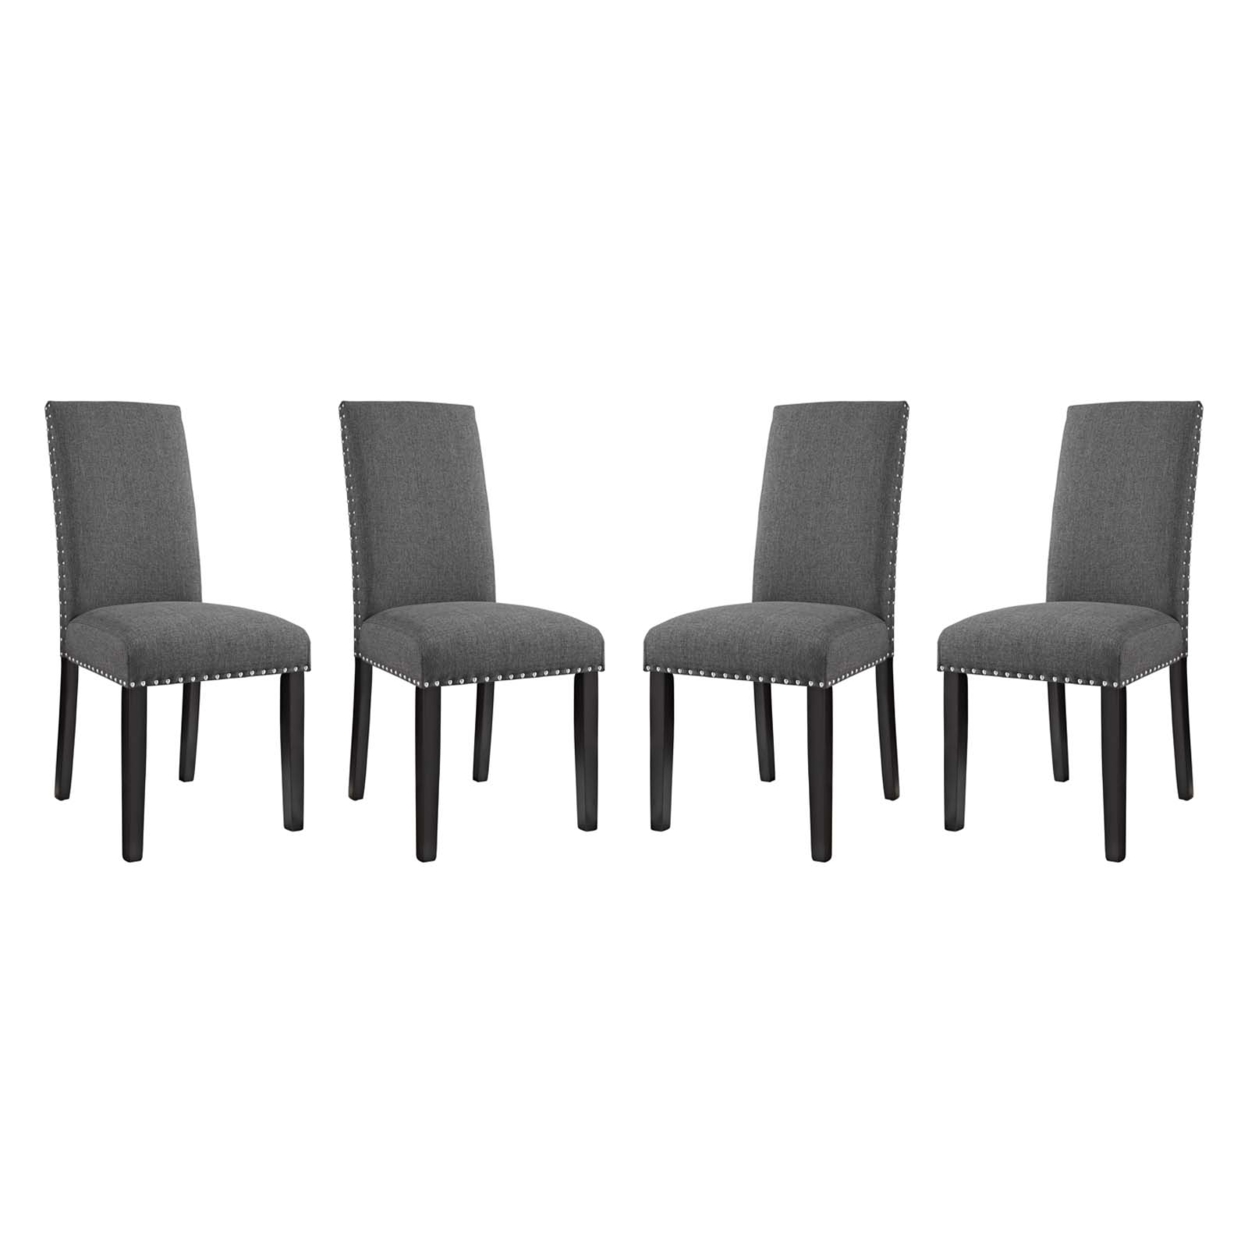 Parcel Dining Side Chair Fabric Set Of 4, Gray